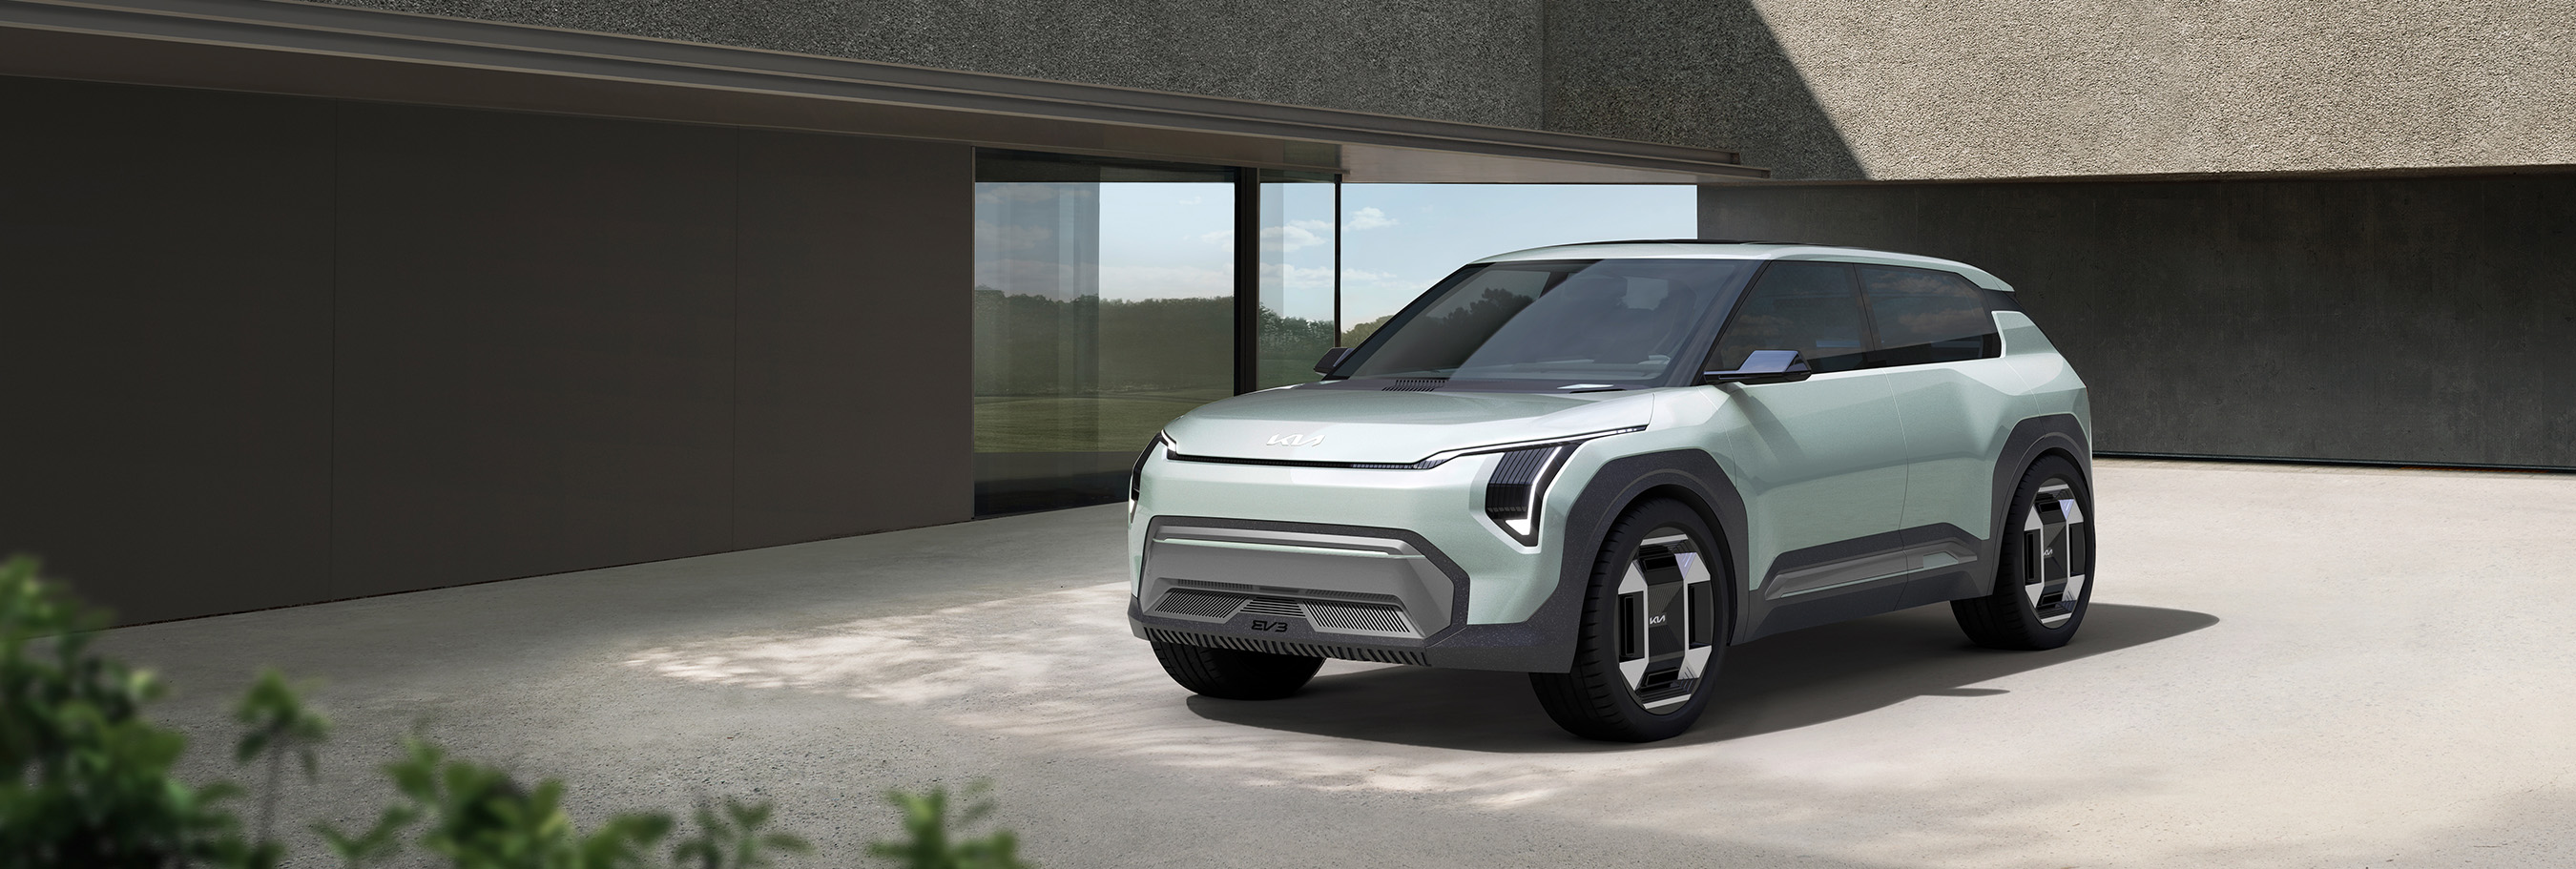 Kia Concept EV3 crossover debuts at the Los Angeles Auto Show with exceptional practicality and a transformative cabin ambience, with design cues from the flagship Kia EV9.